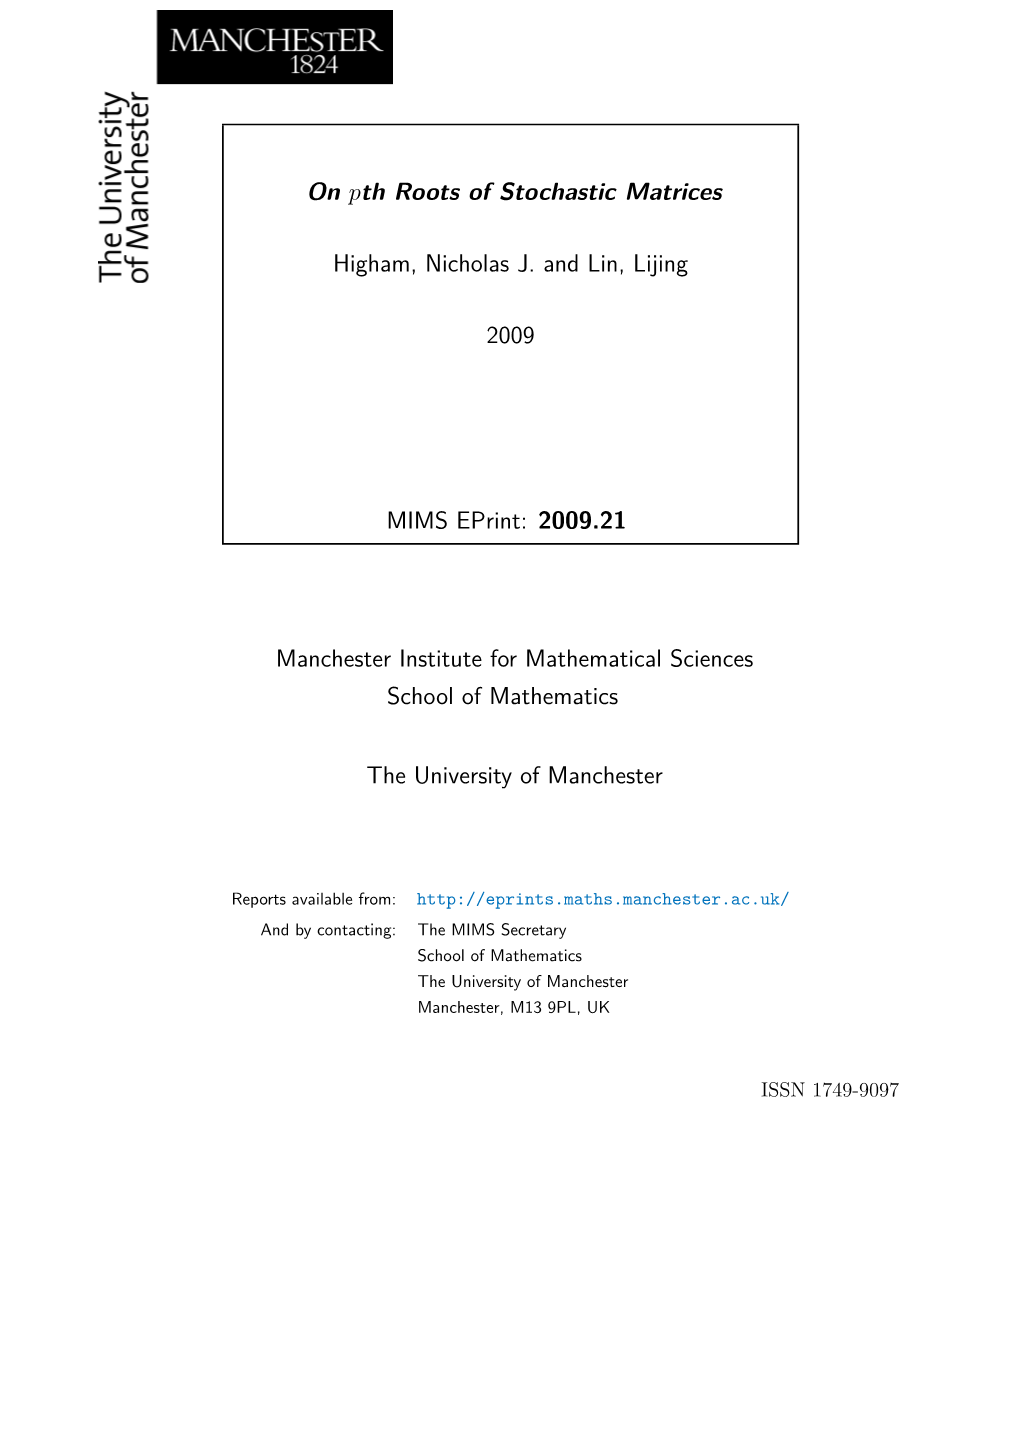 On Pth Roots of Stochastic Matrices Higham, Nicholas J